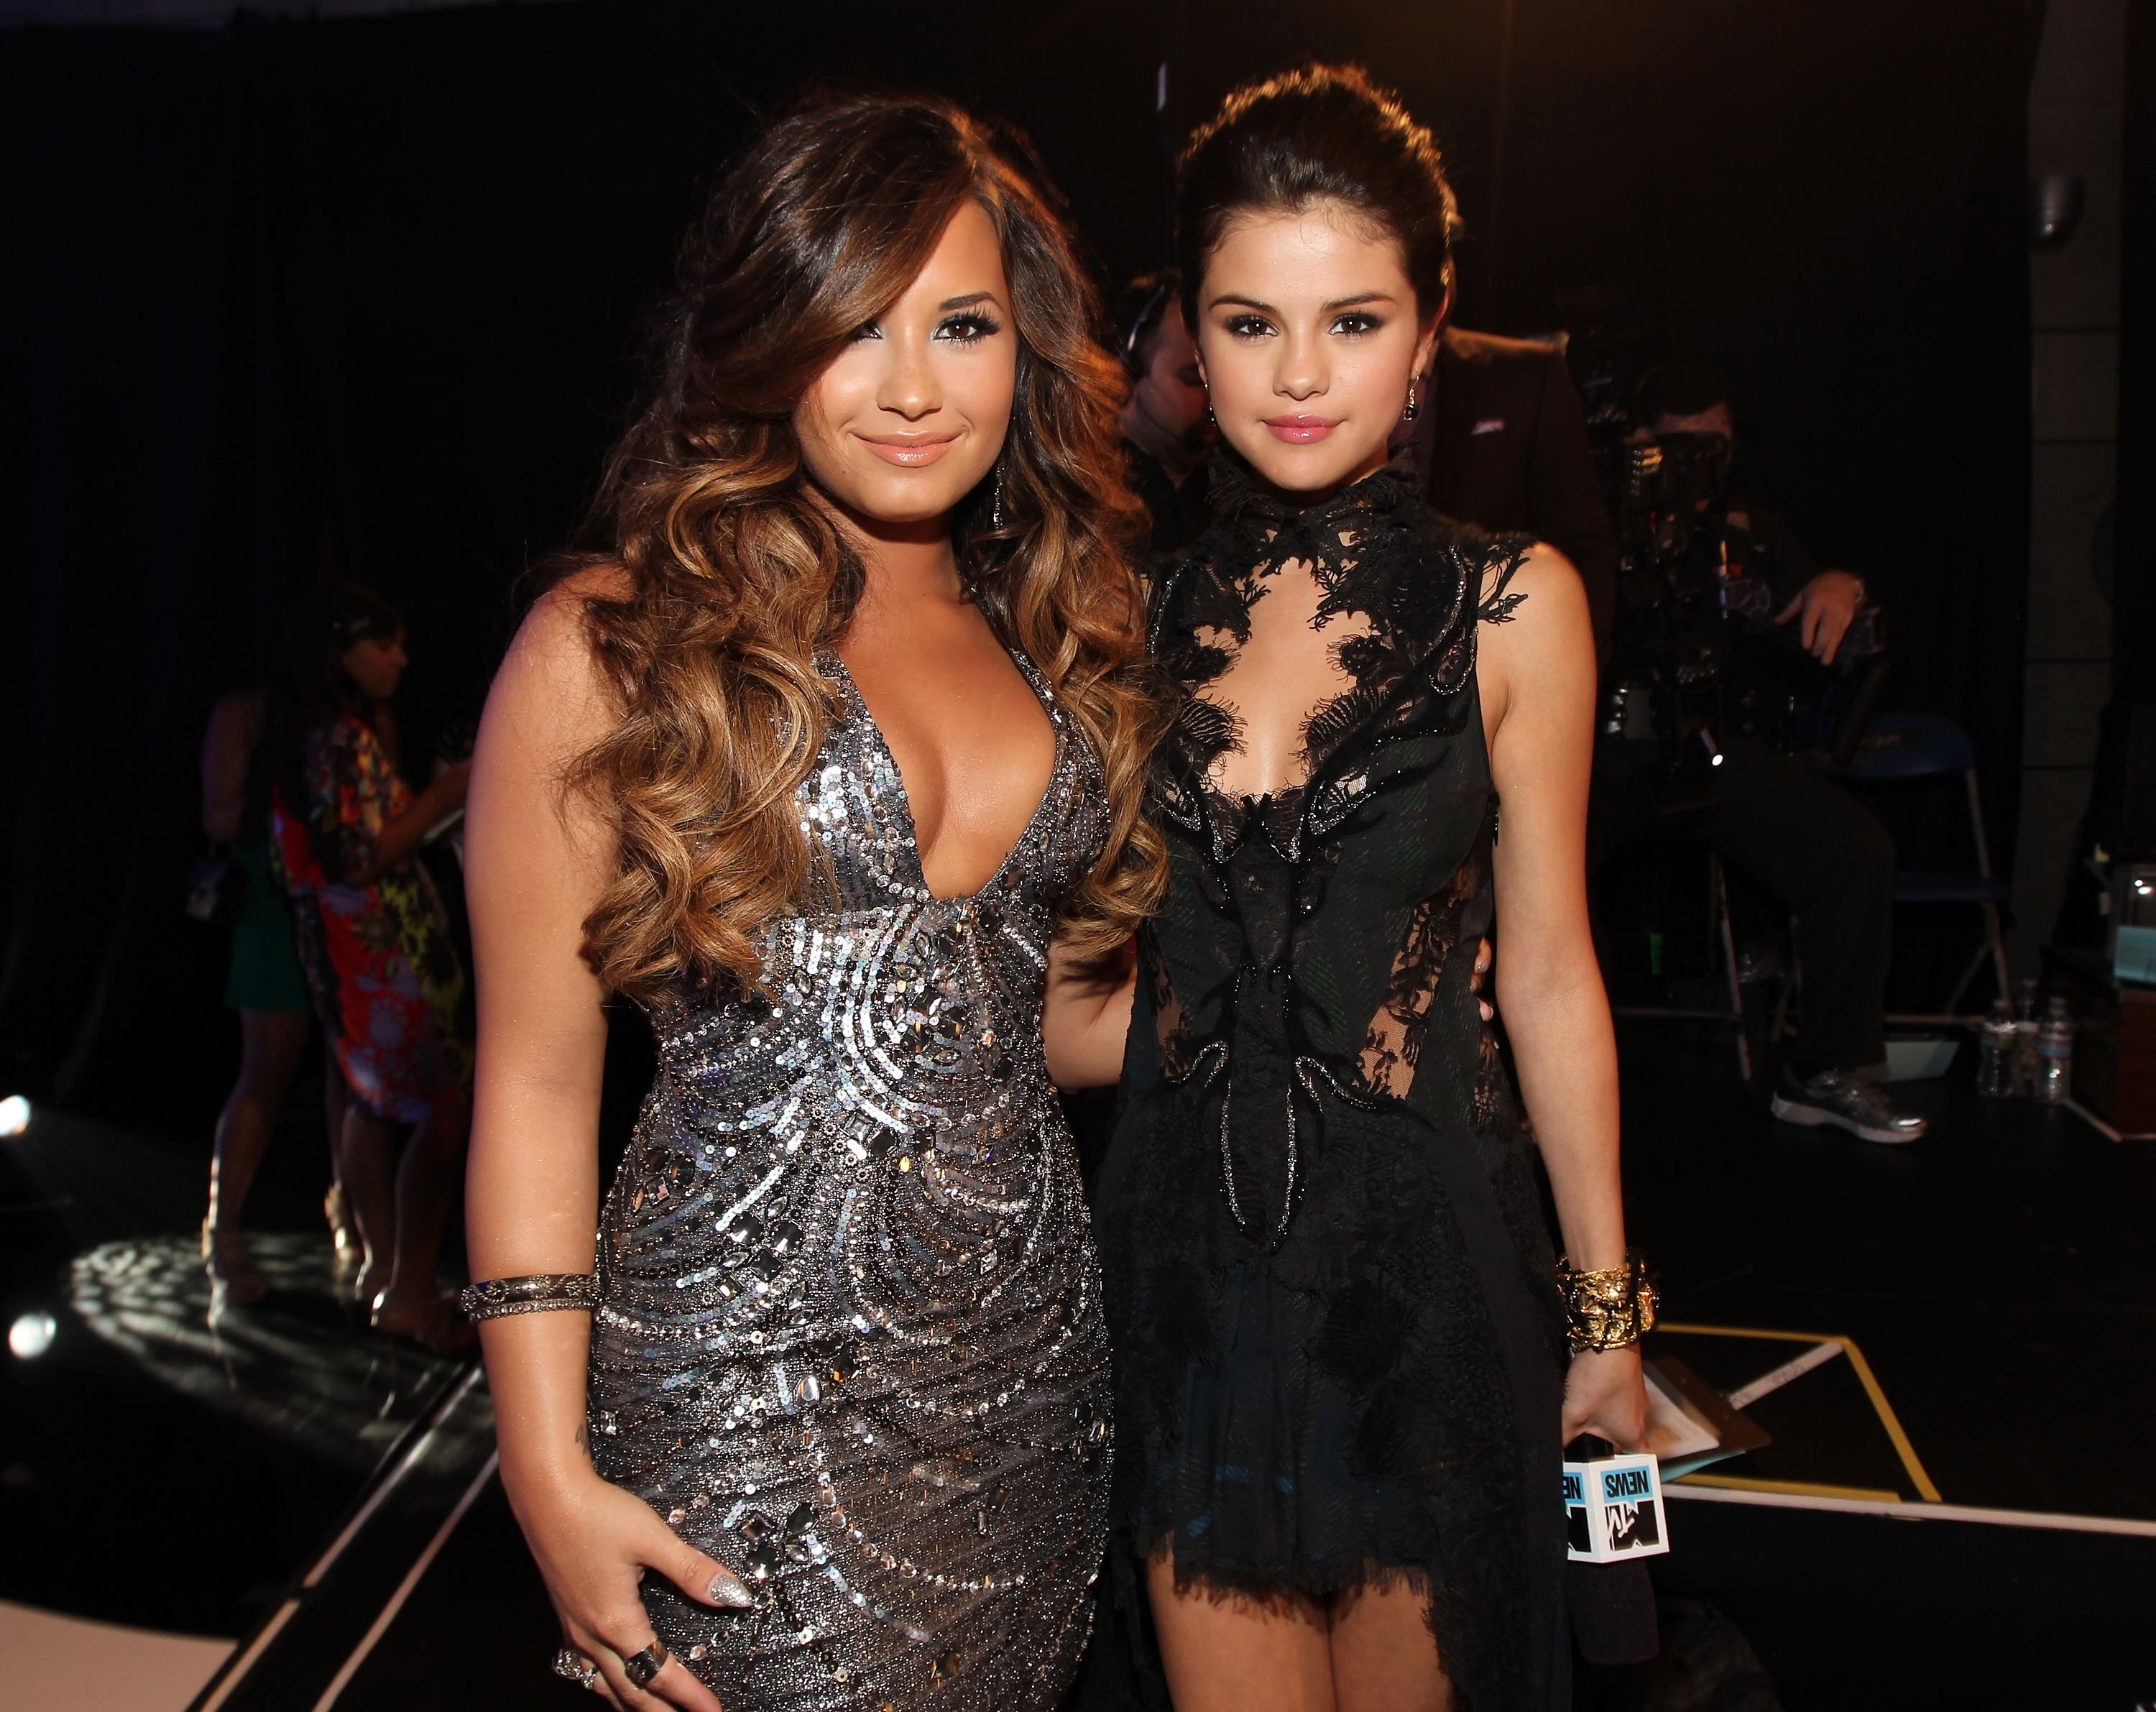 Demi Lovato (L) and Selena Gomez arrive at the 2011 MTV Video Music Awards on August 28, 2011 in Los Angeles, California. 